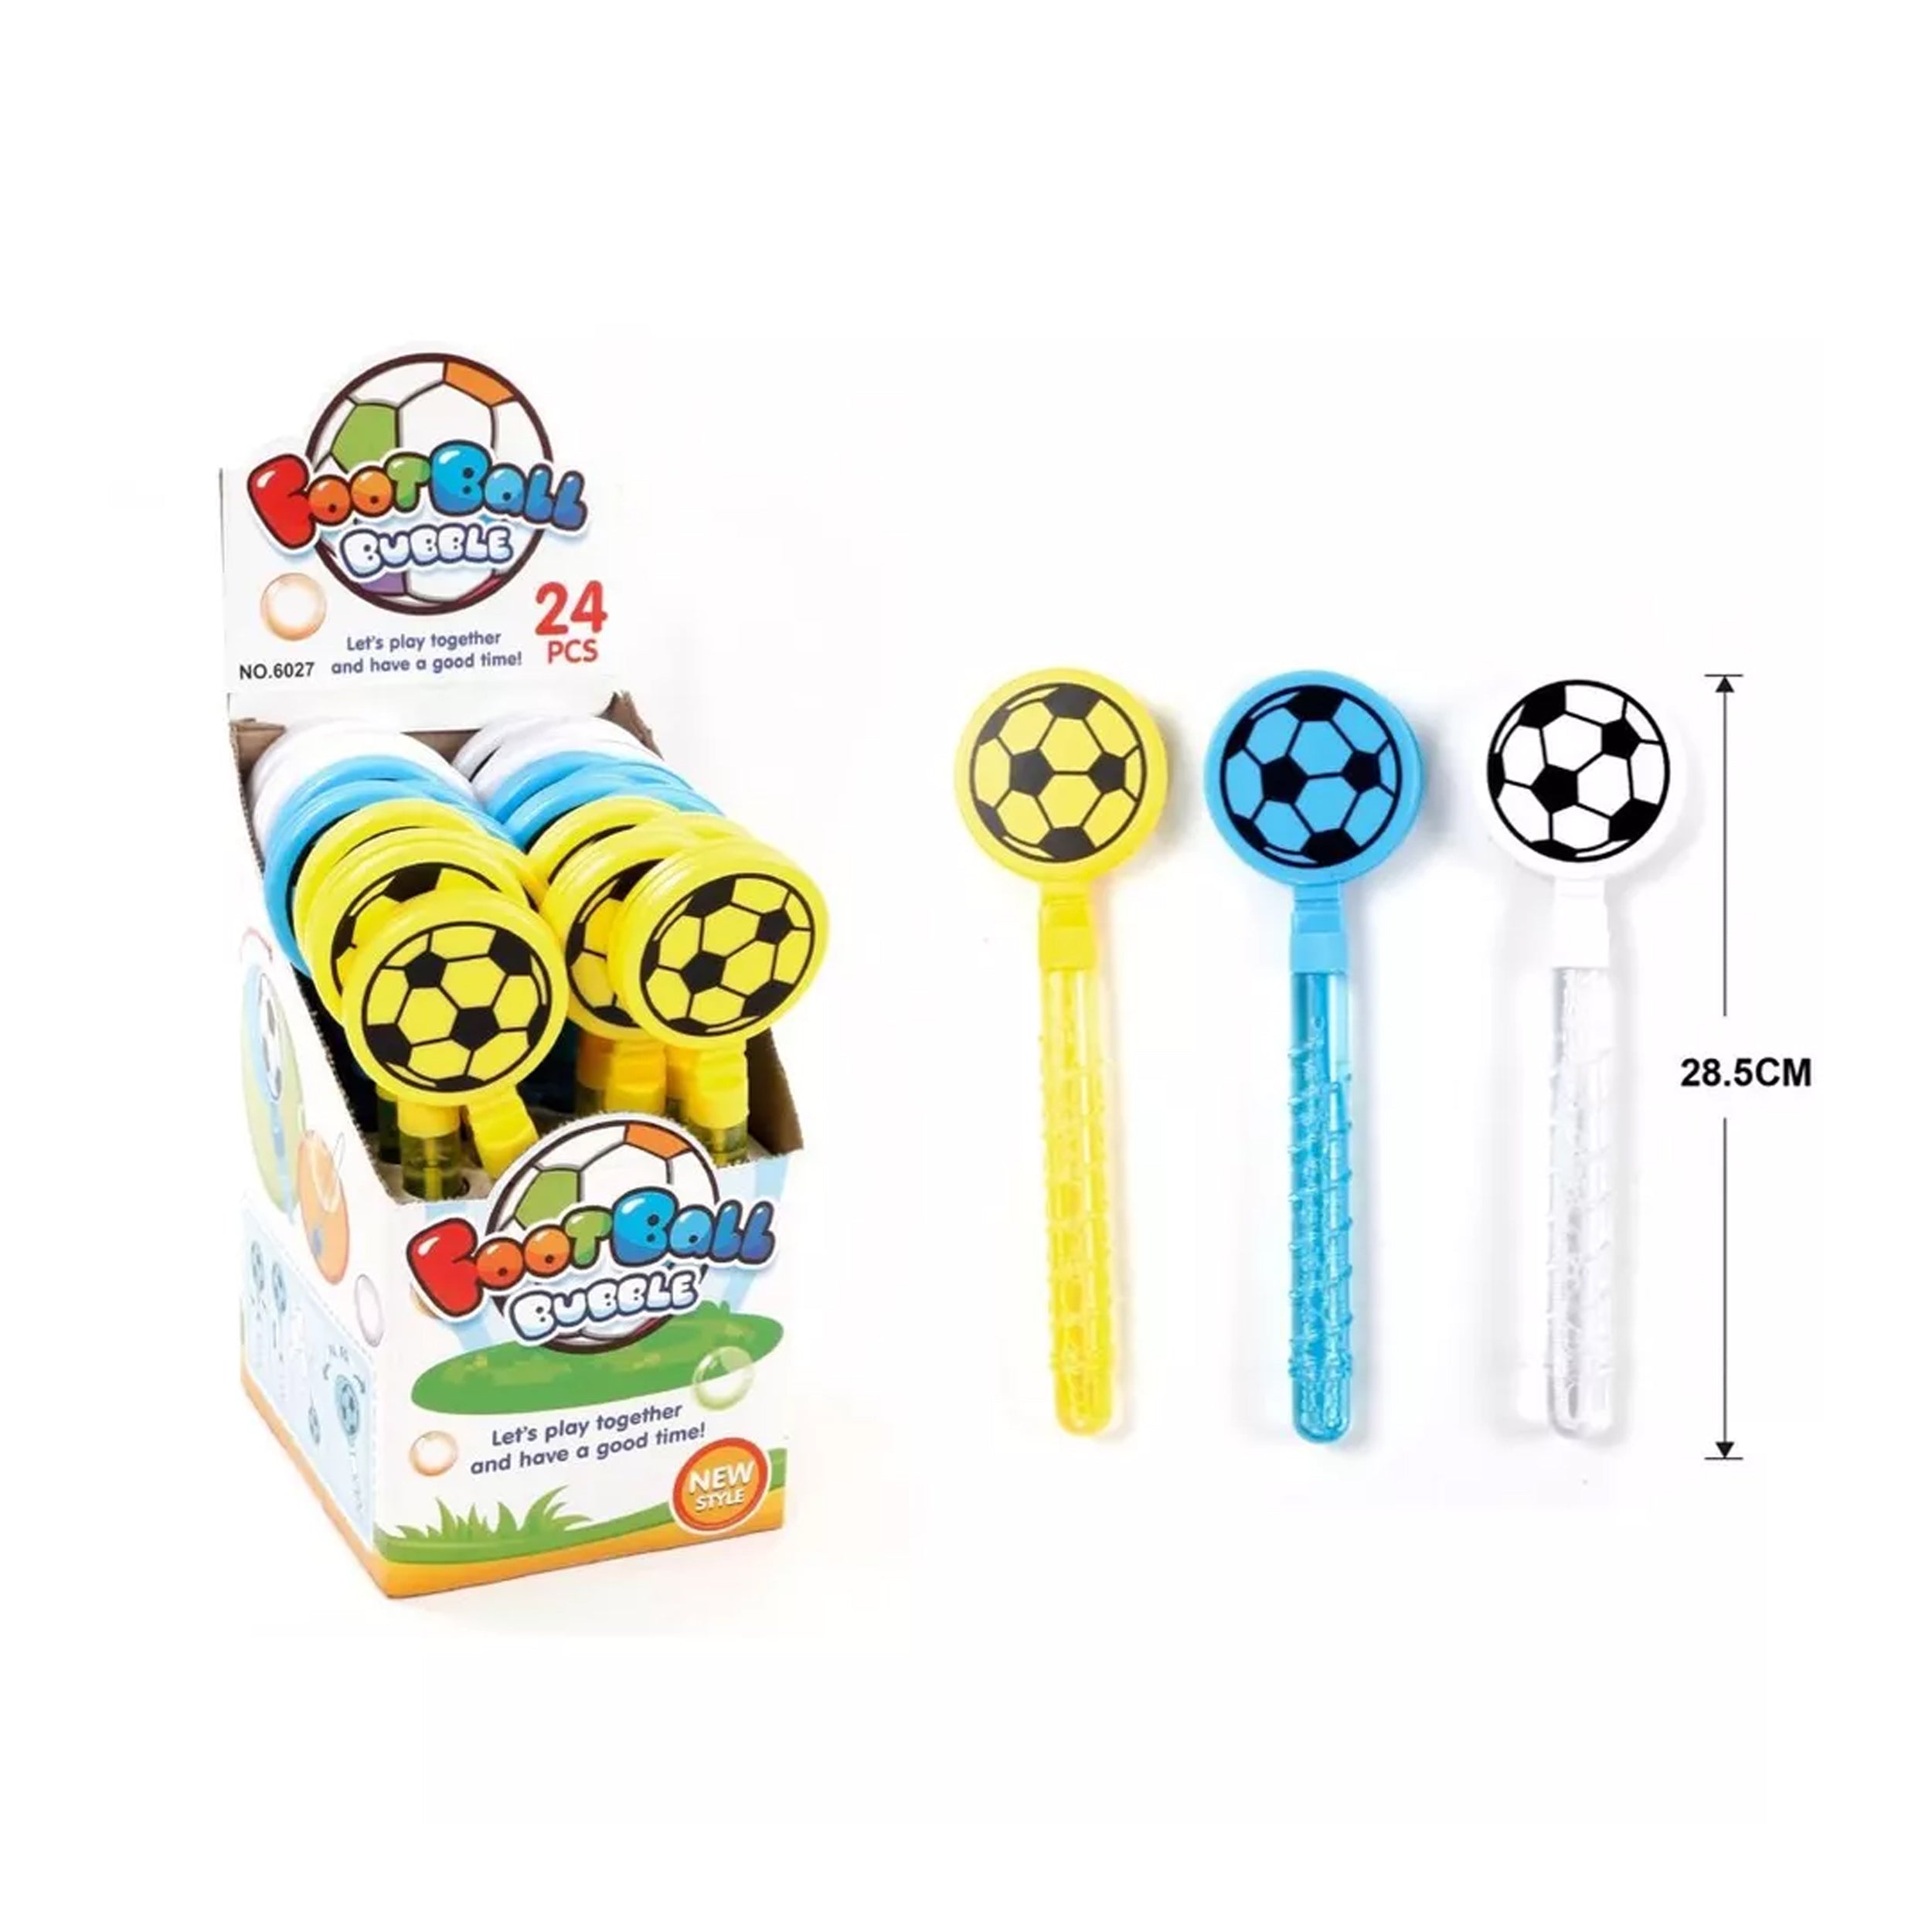 New Summer Footballs Bubble Blower for Kids - Fun and Creative Outdoor Playtime